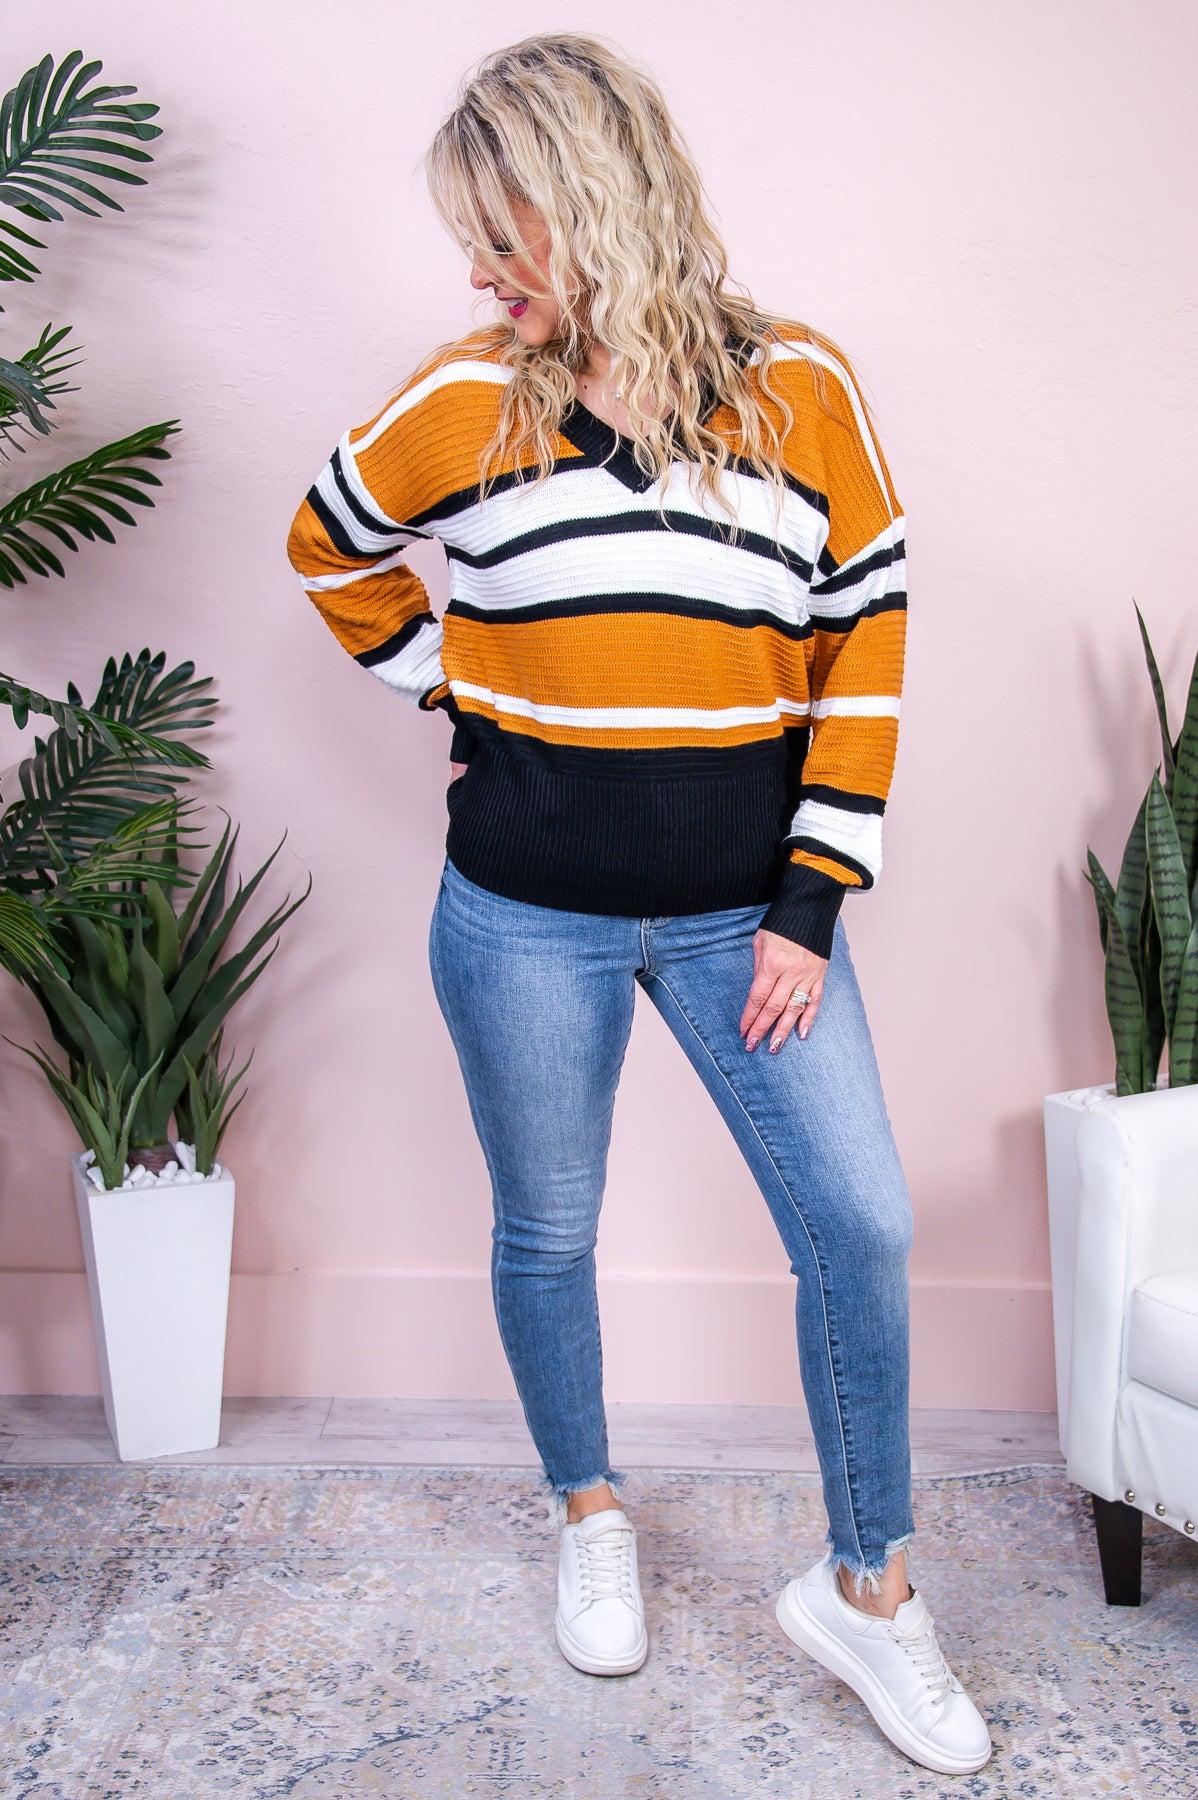 Always Show Kindness Black/White/Camel Striped Sweater Top - T8515BK